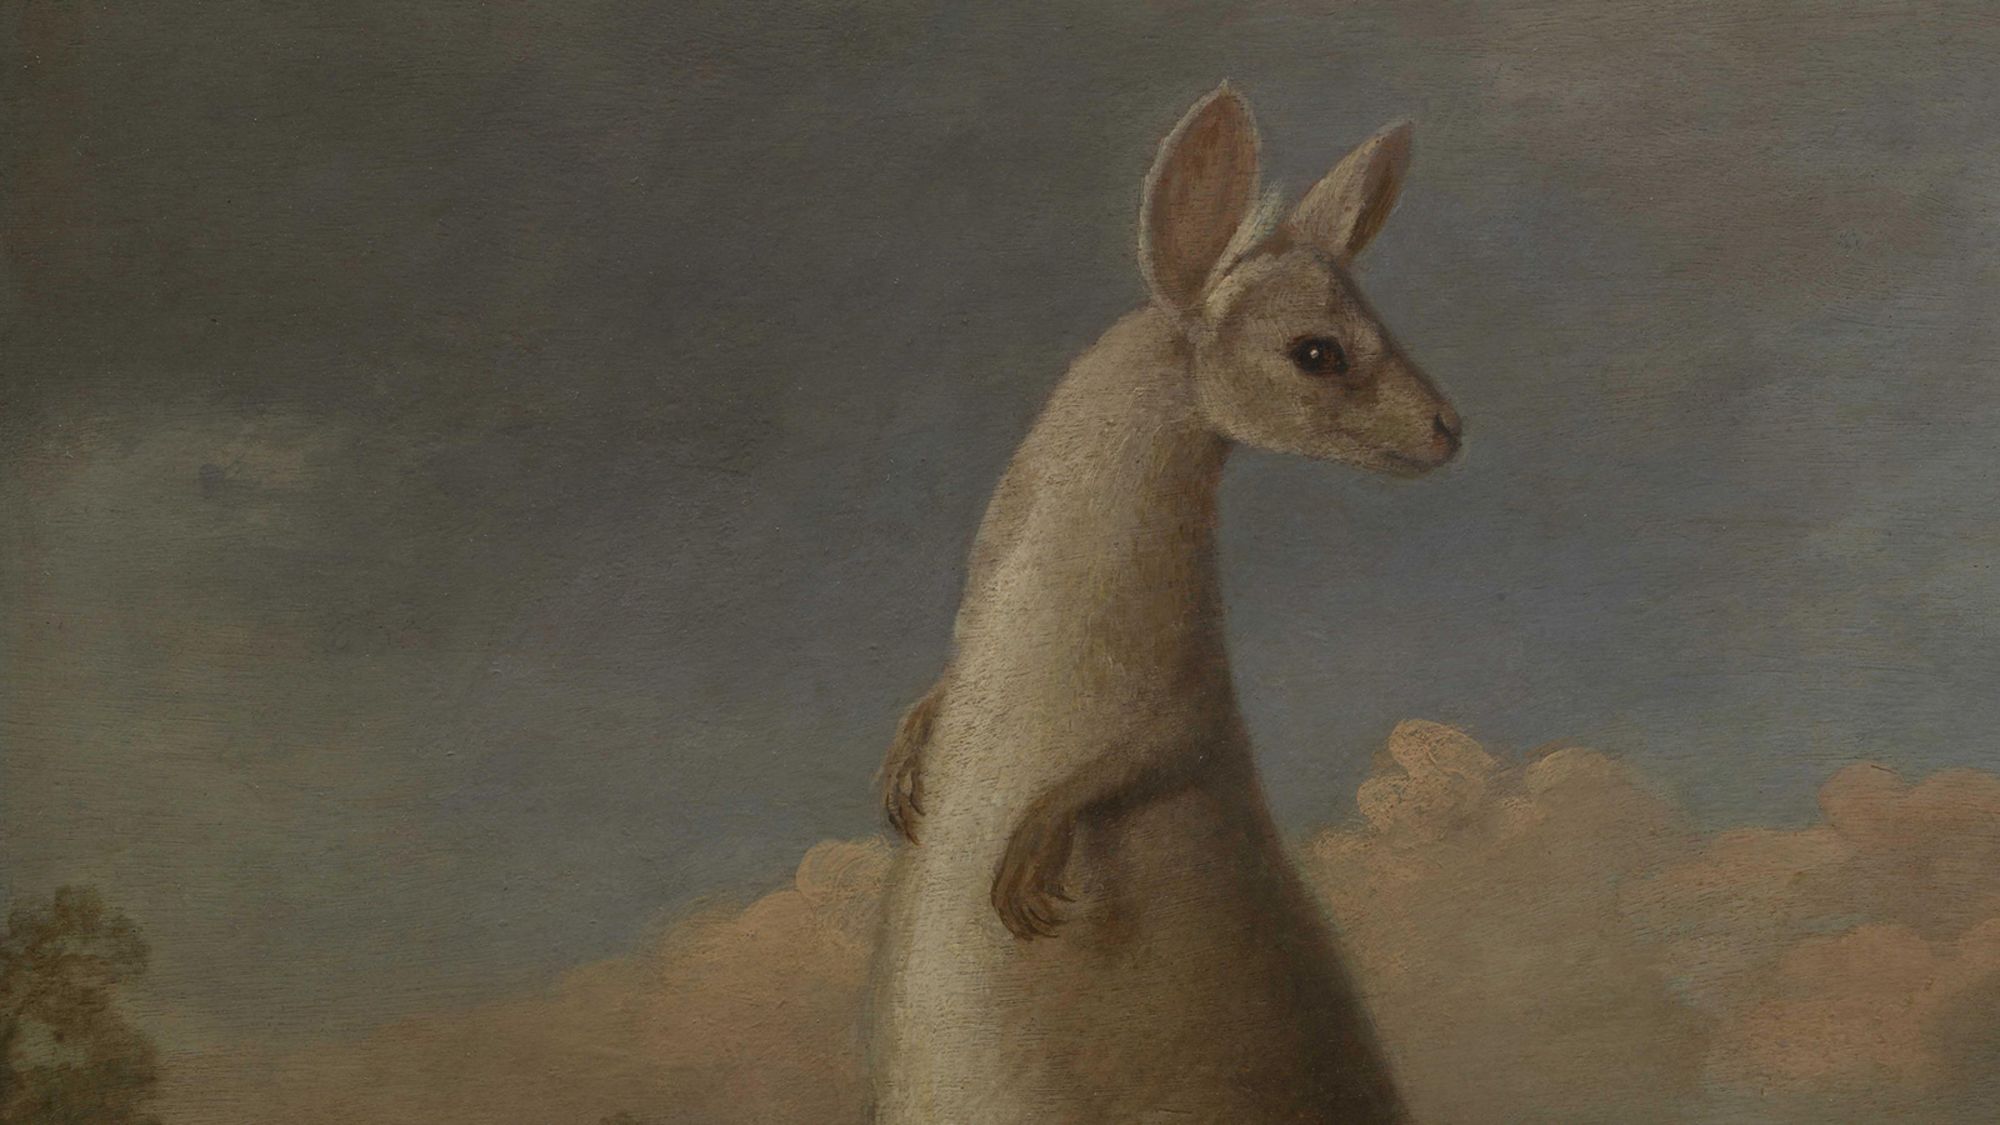 Paintings of a kangaroo and dingo were commissioned by Sir Joseph Banks following his participation on Captain James Cook's first voyage to the Pacific, which was also the first British voyage devoted exclusively to scientific discovery. Both paintings were executed by George Stubbs, the foremost animal painter in Great Britain during the 18th century.